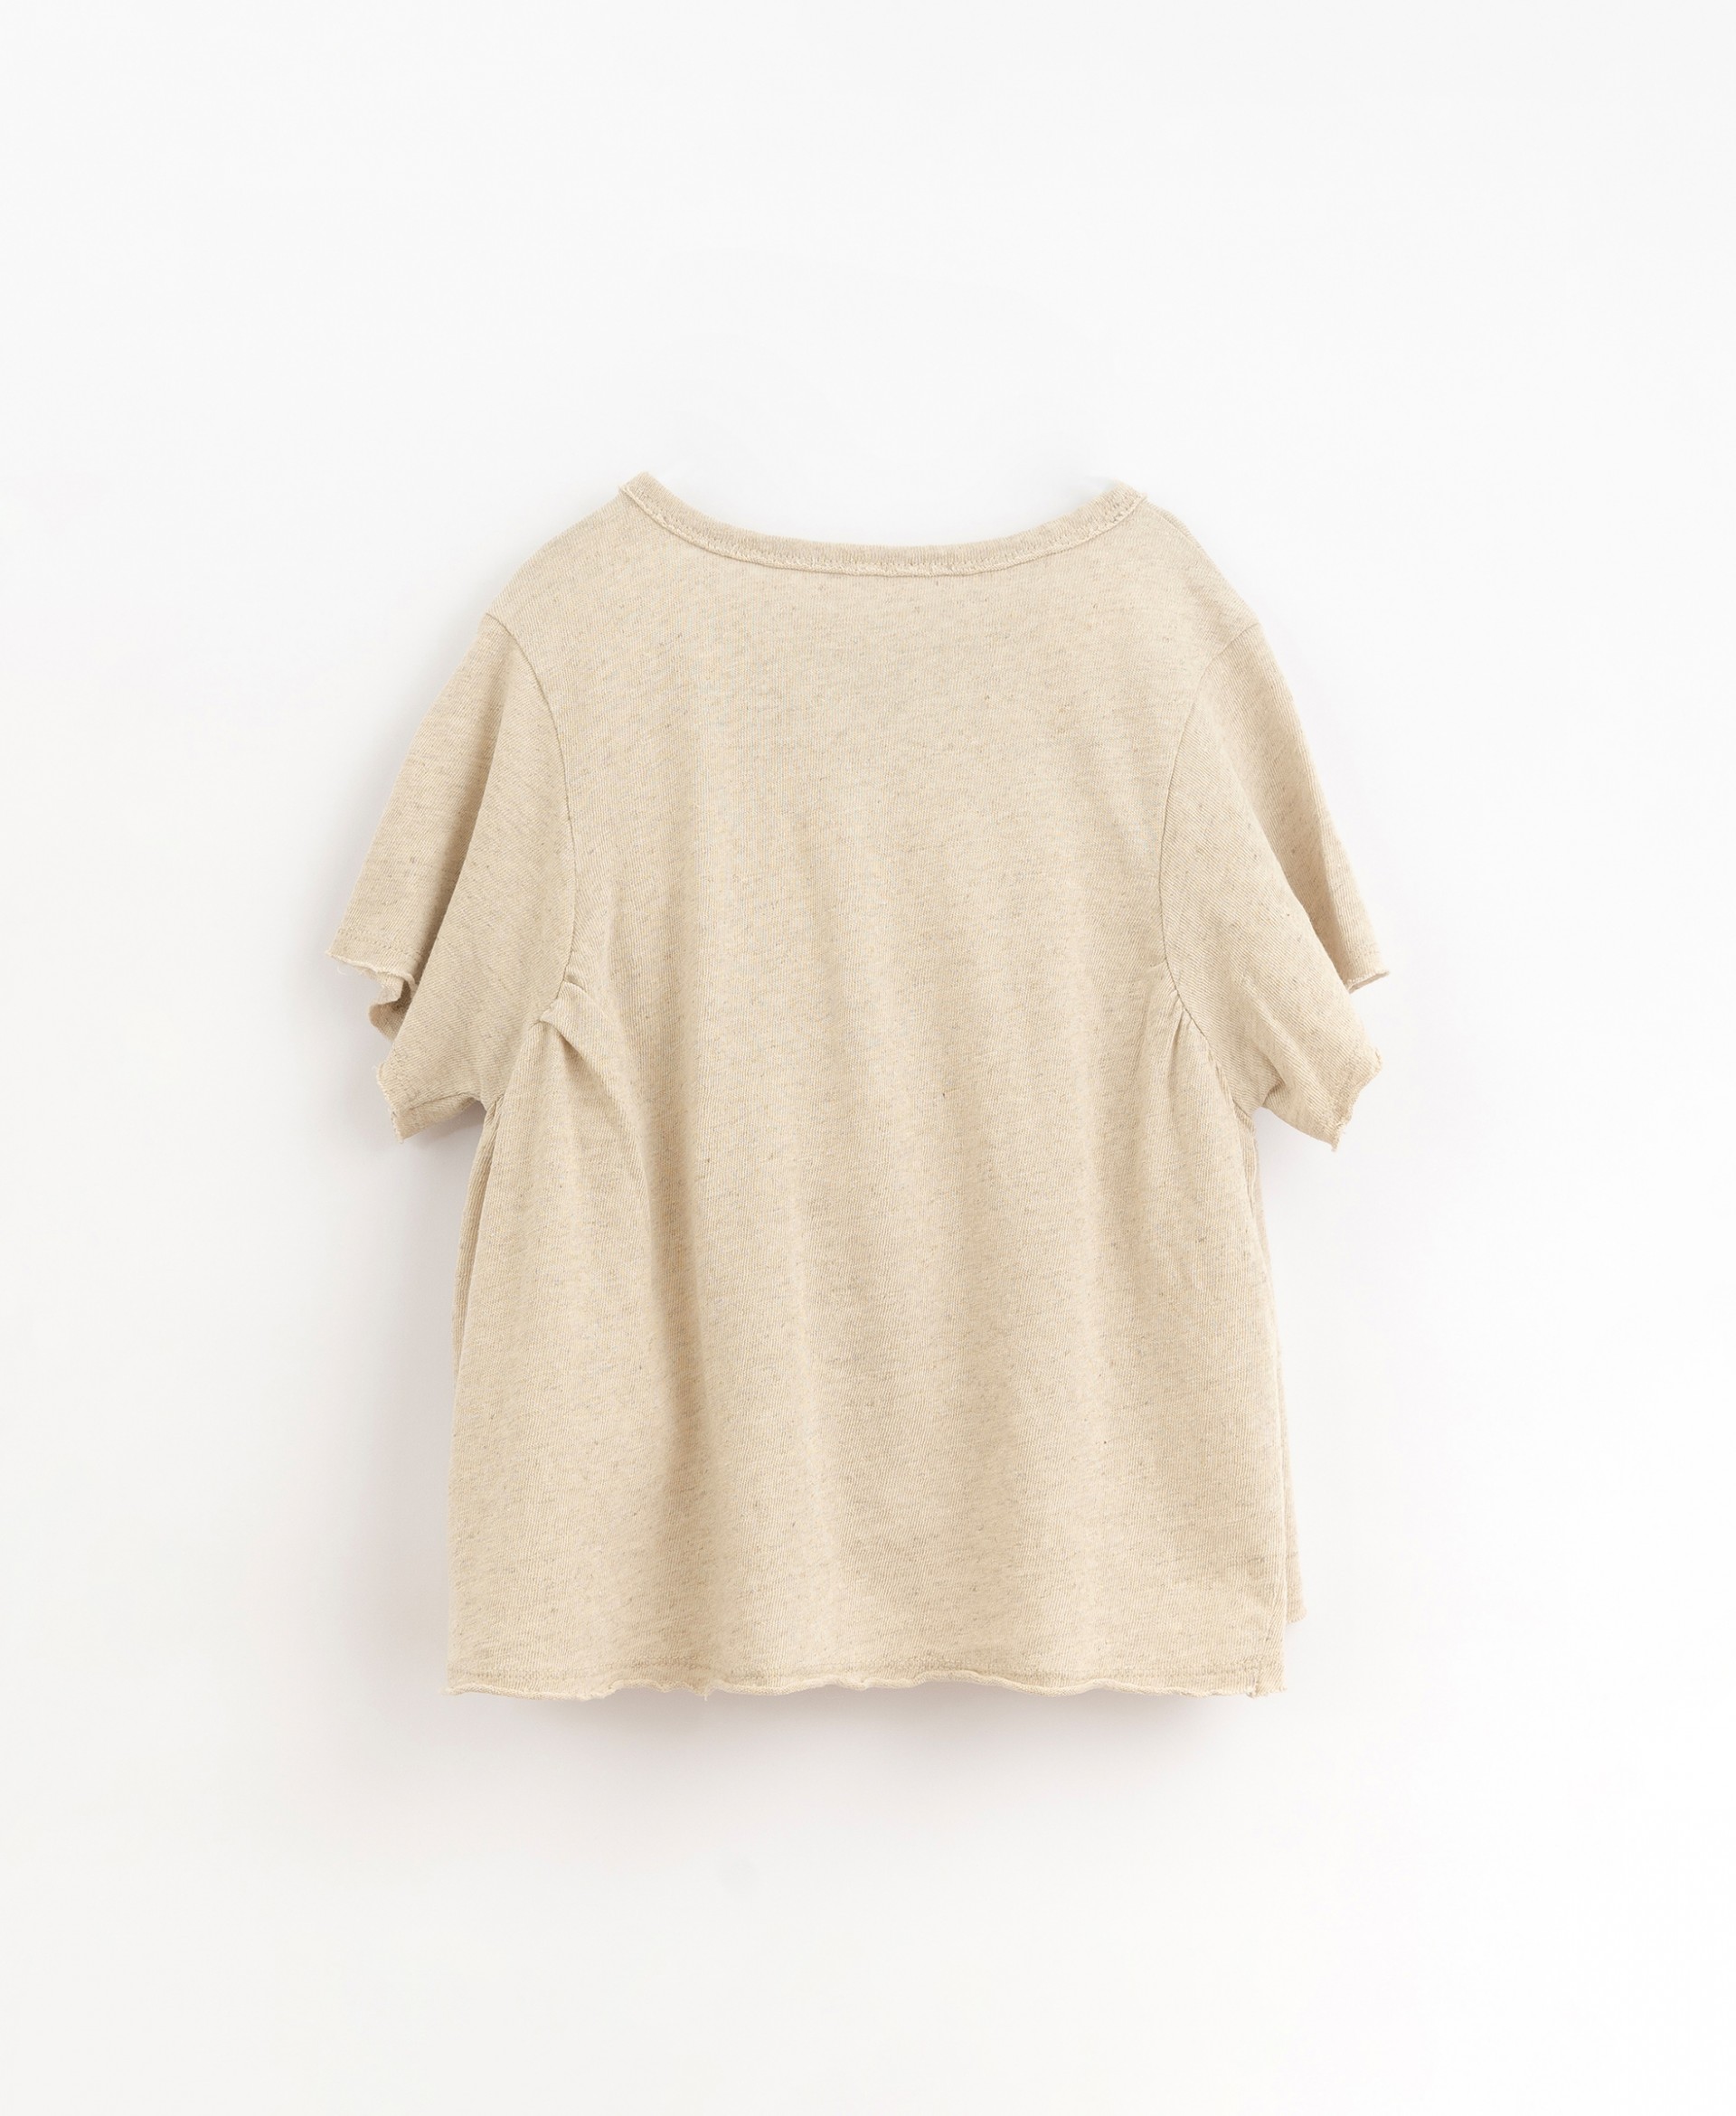 T-shirt with embroidery detail on the front | Organic Care